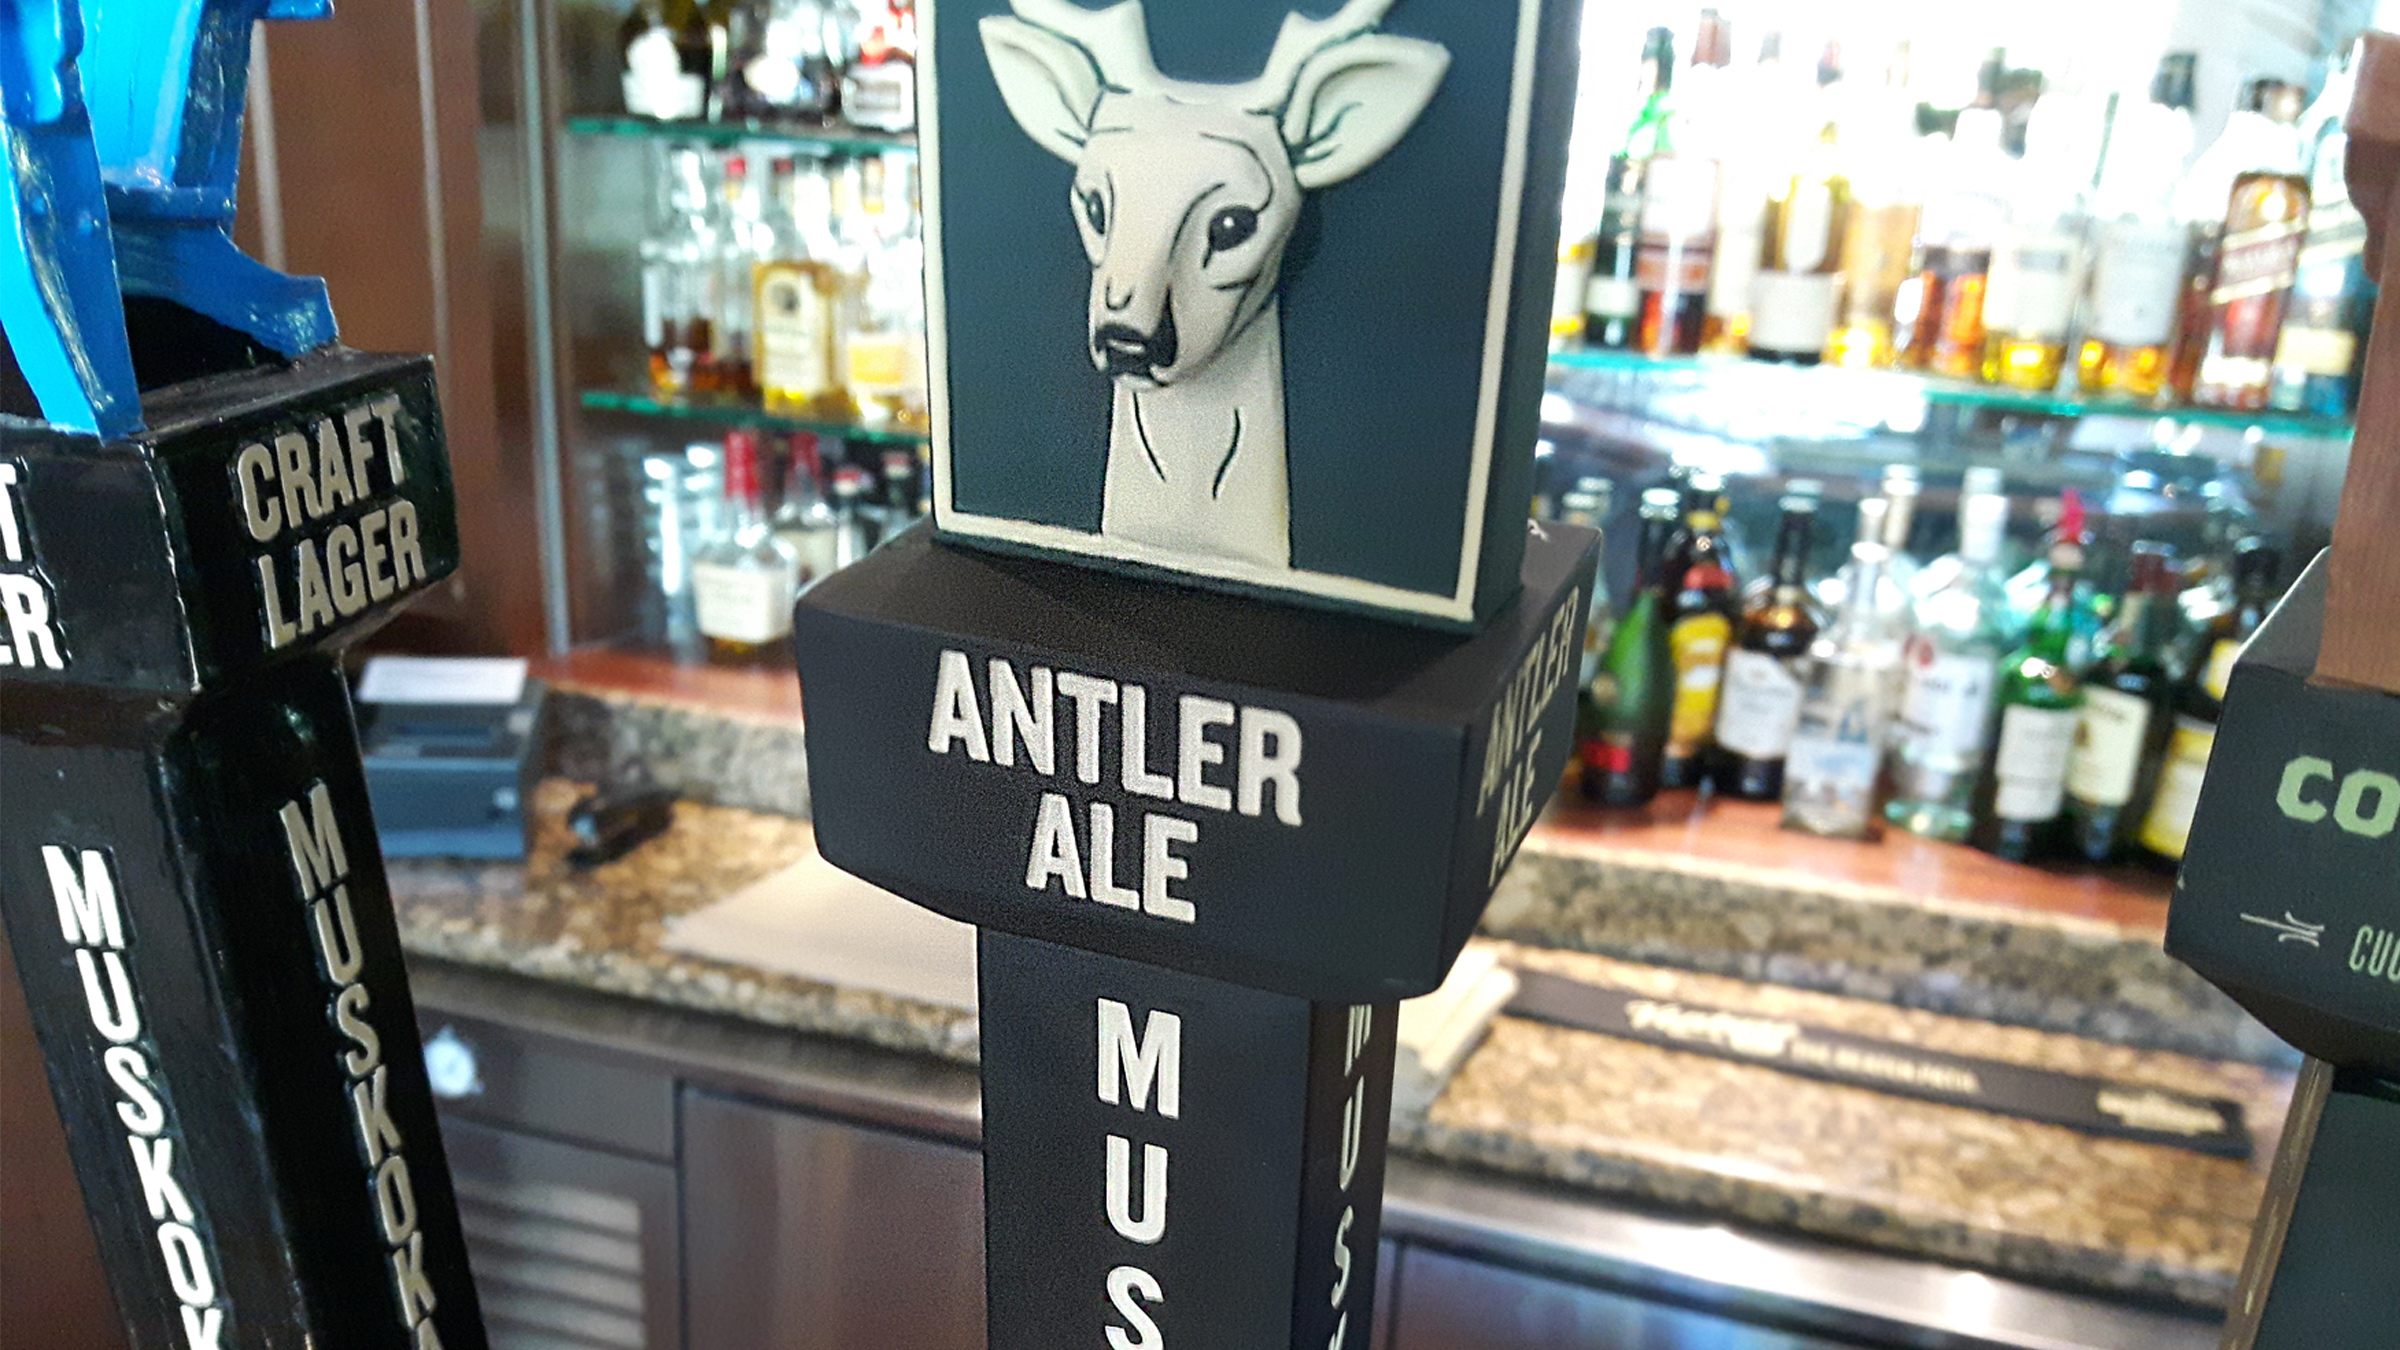 Antler Ale, our new house craft beer developed in partnership with Muskoka Brewery, is the perfect brew for summer days in Muskoka.